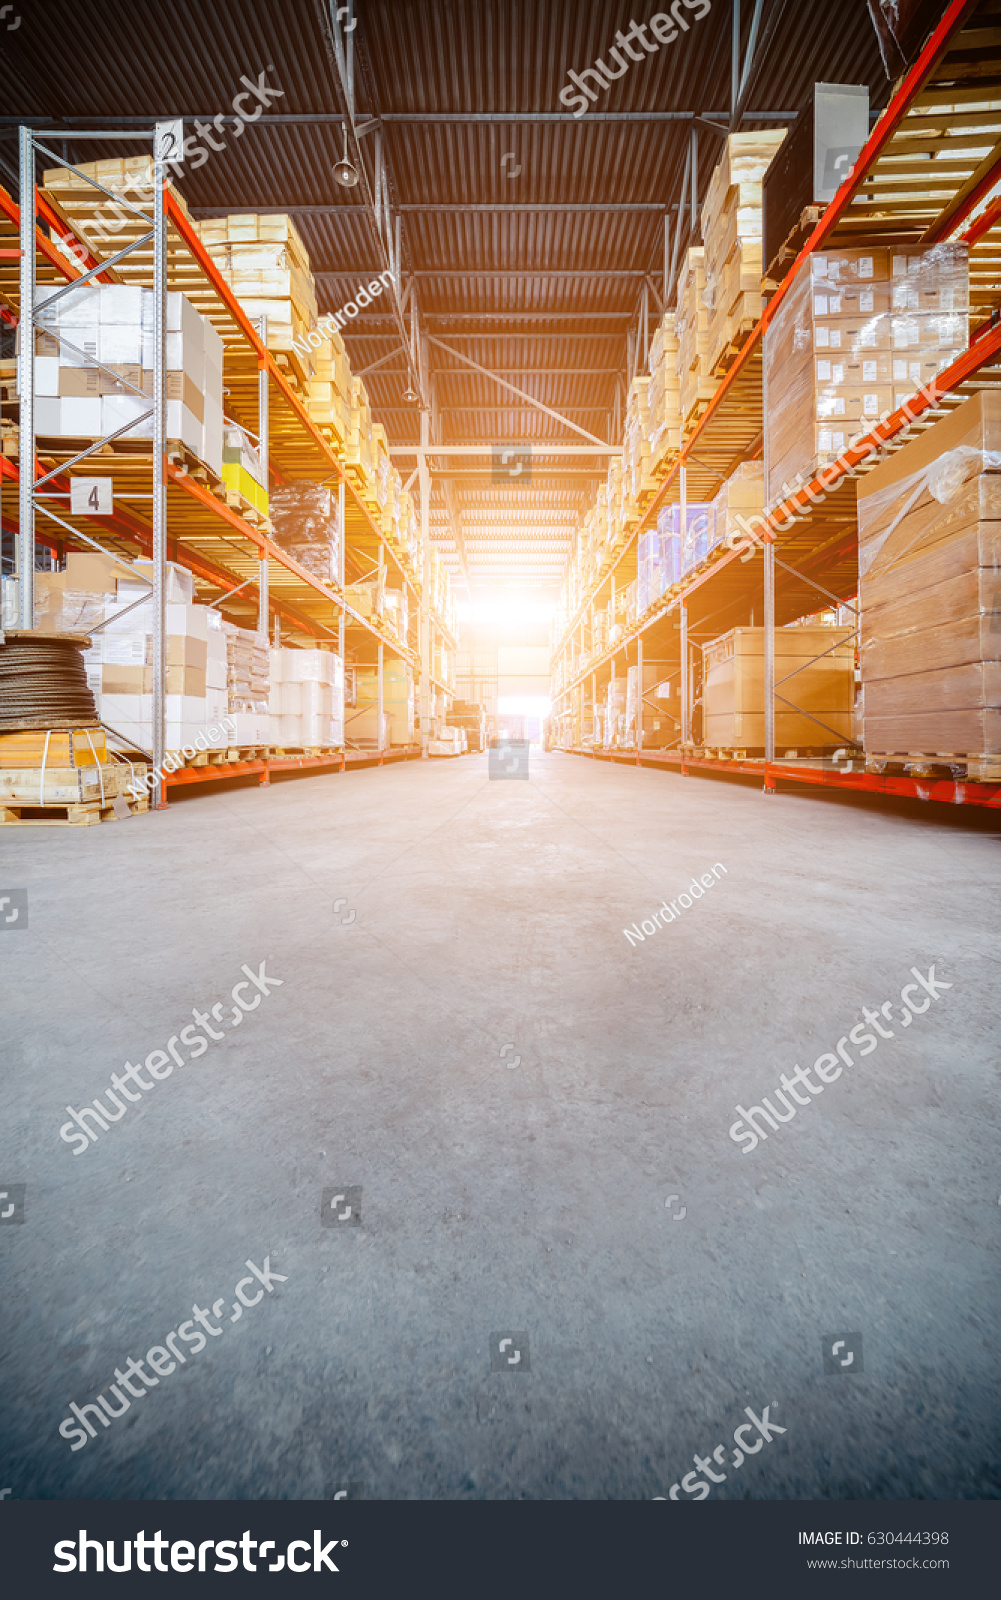 Warehouse industrial and logistics companies. Long shelves with a variety of boxes and containers. Toning the image. Bright sunlight. #630444398